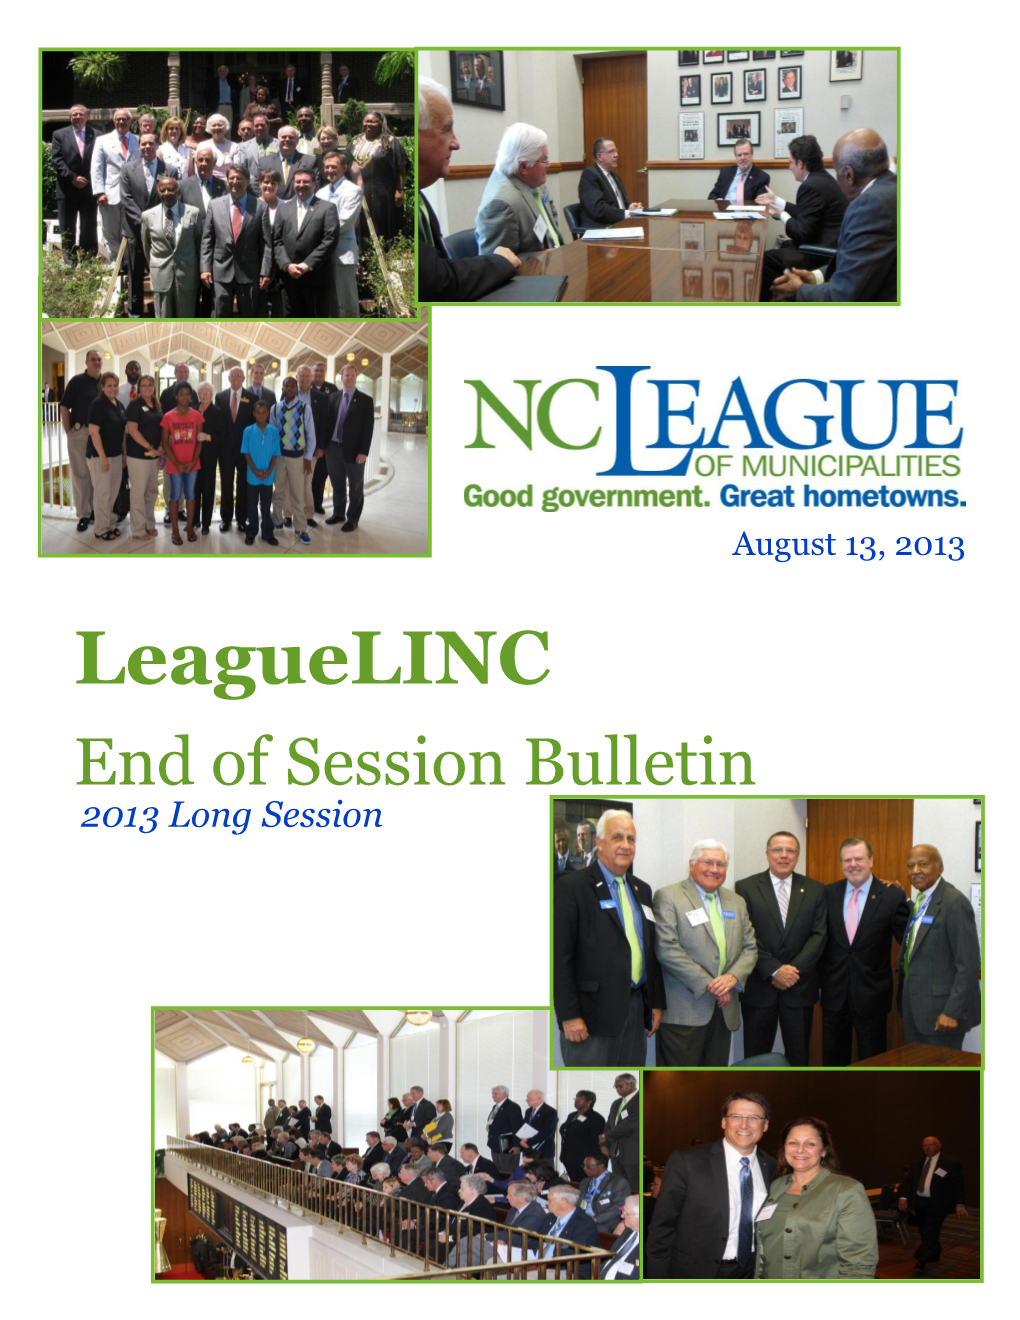 2013 Leaguelinc End of Session Bulletin 2013 Long Session